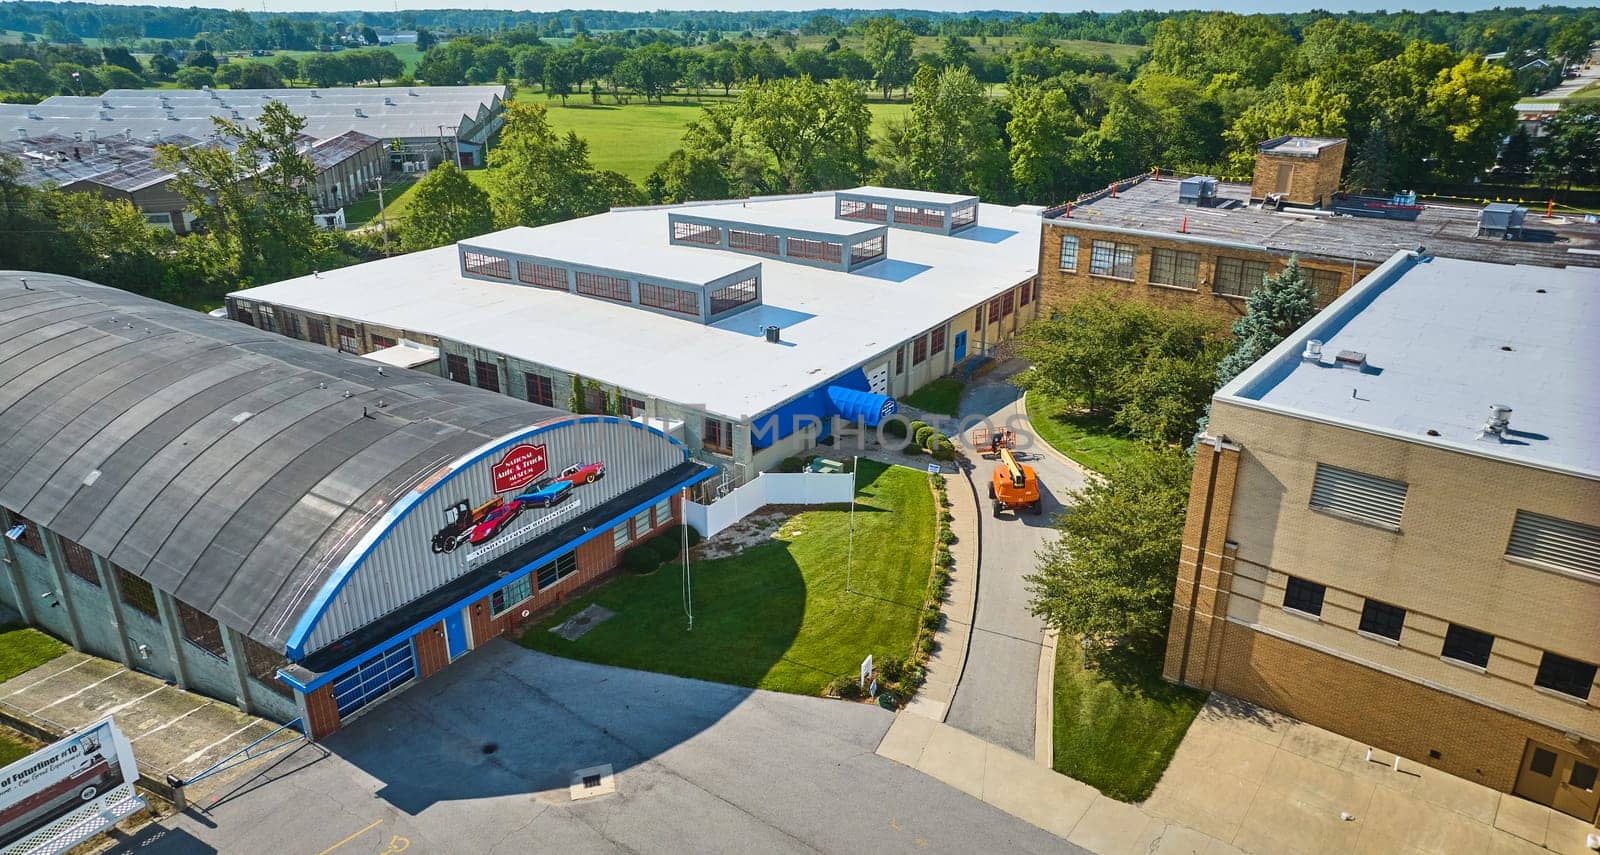 Image of National auto and truck museum beside ACD museum aerial